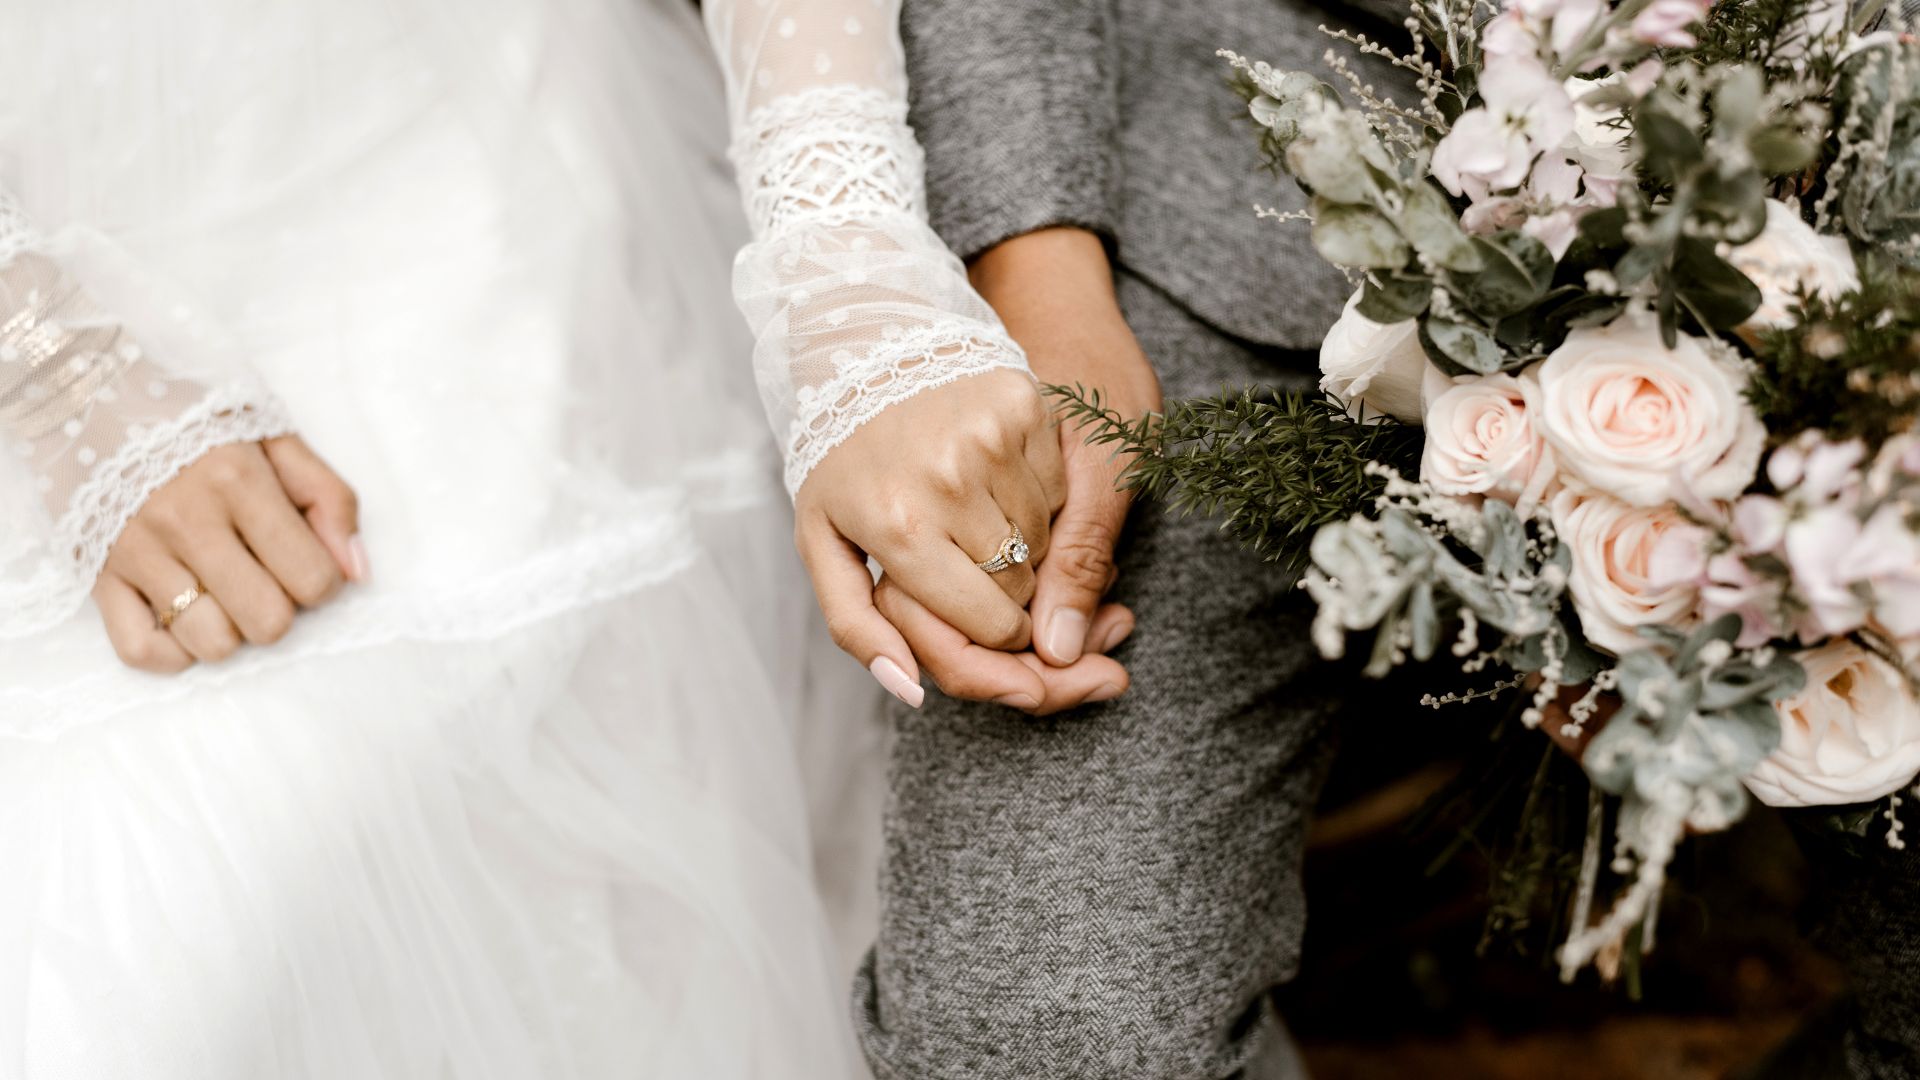 A photo of a newly wed couple holding hands and a bouquet of flowers.